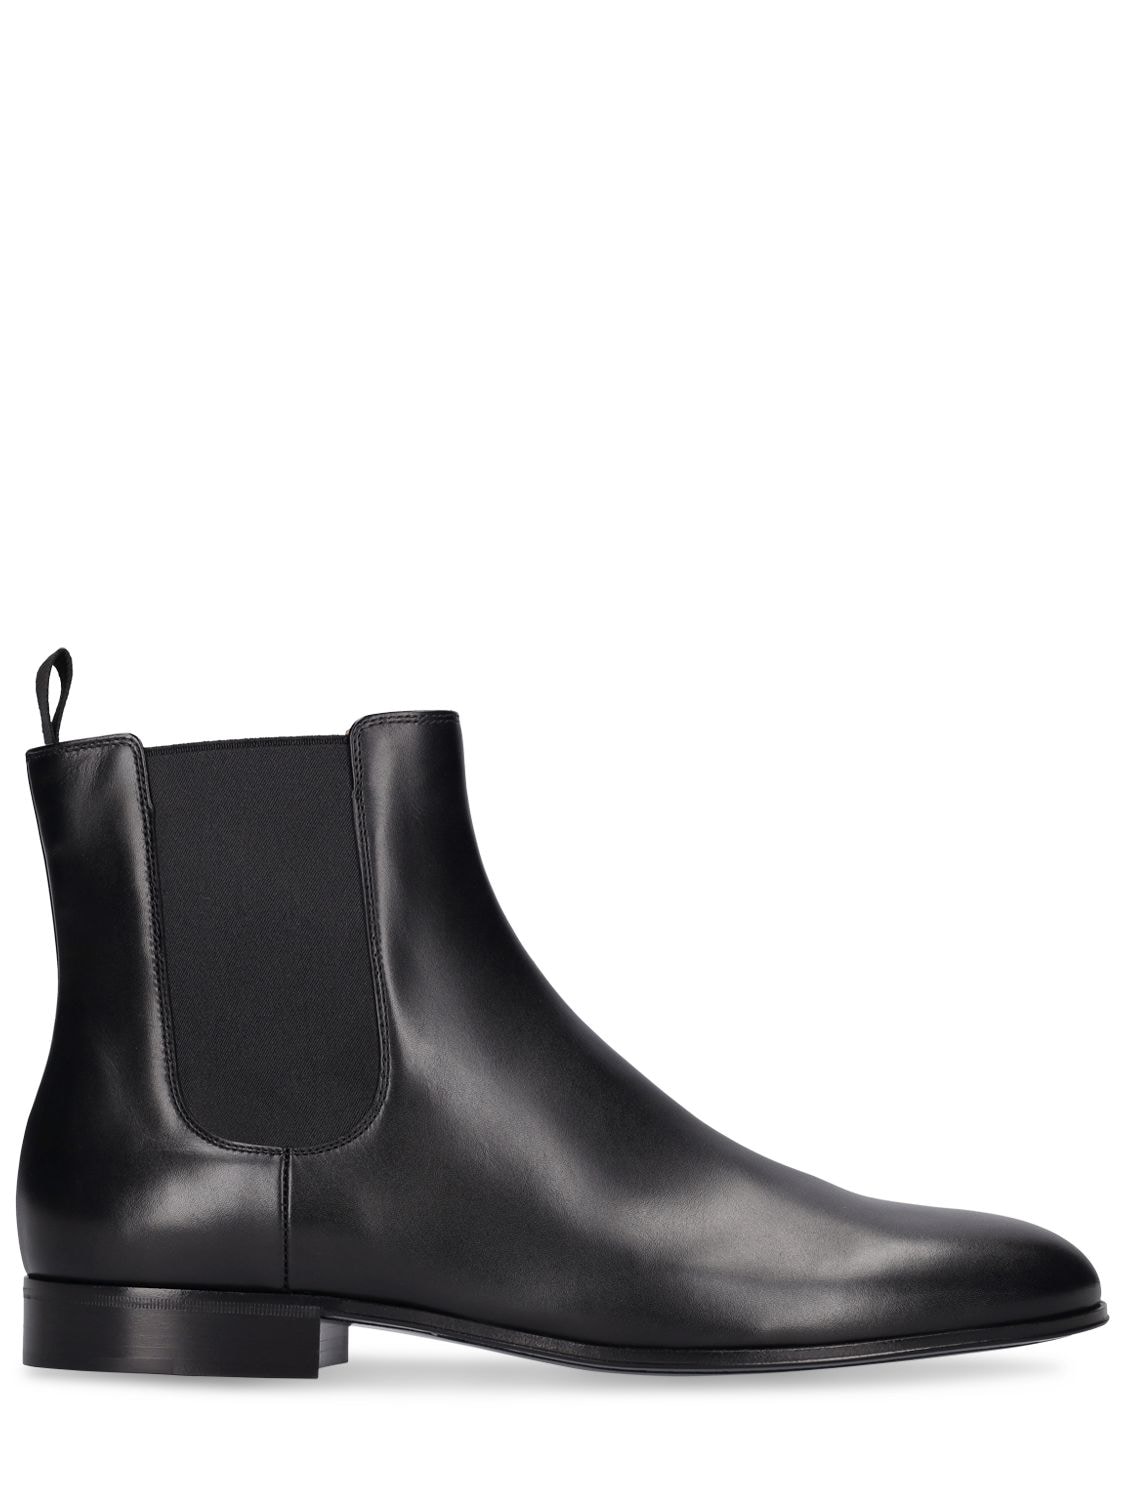 GIANVITO ROSSI ALAIN LEATHER CHELSEA BOOTS